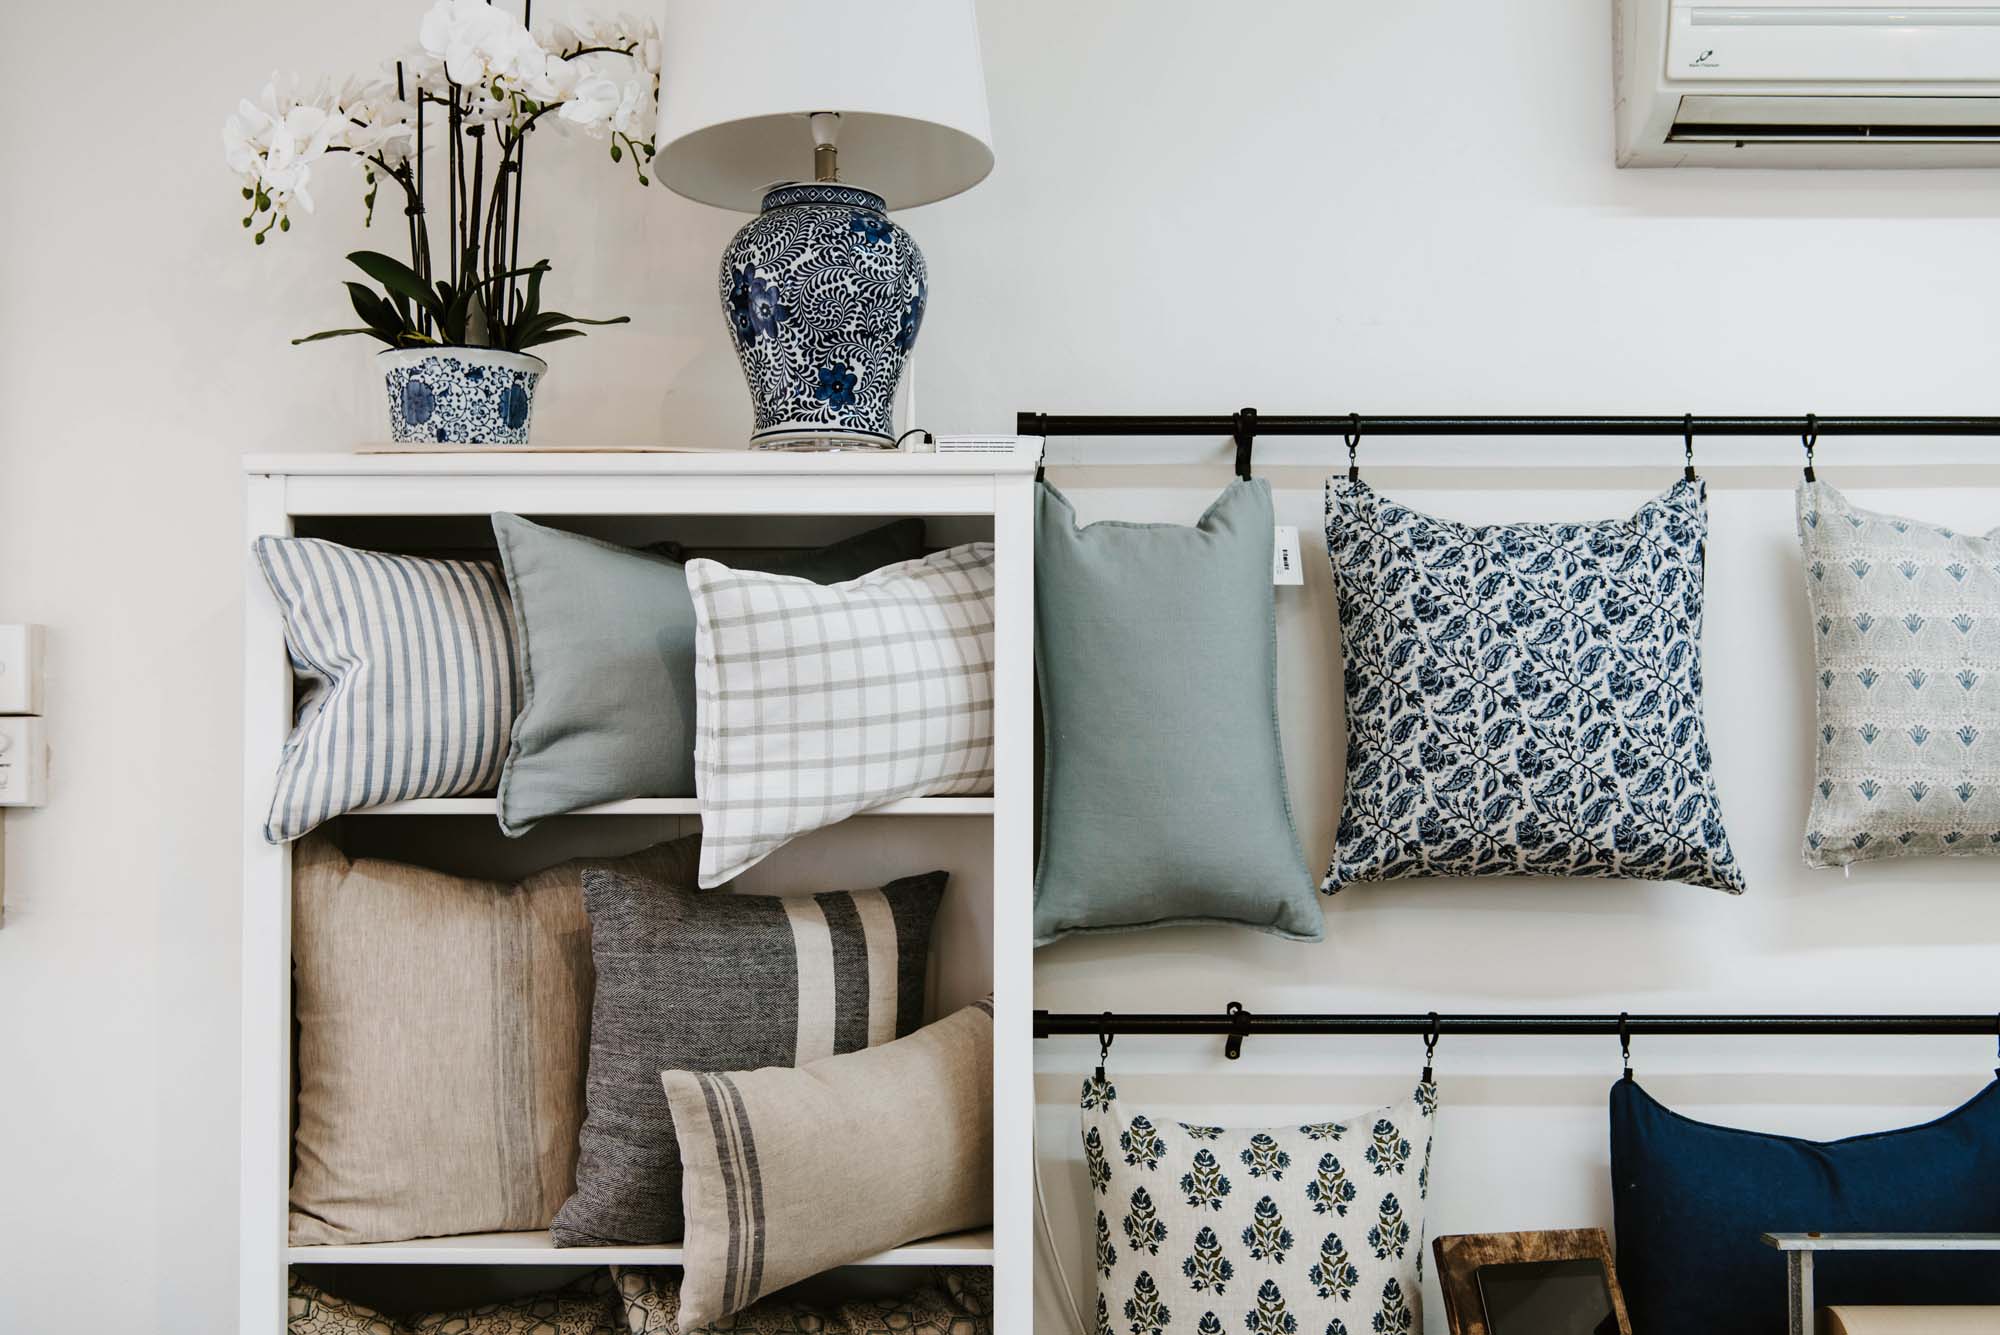 A display of blue and white pillows on a shelf.